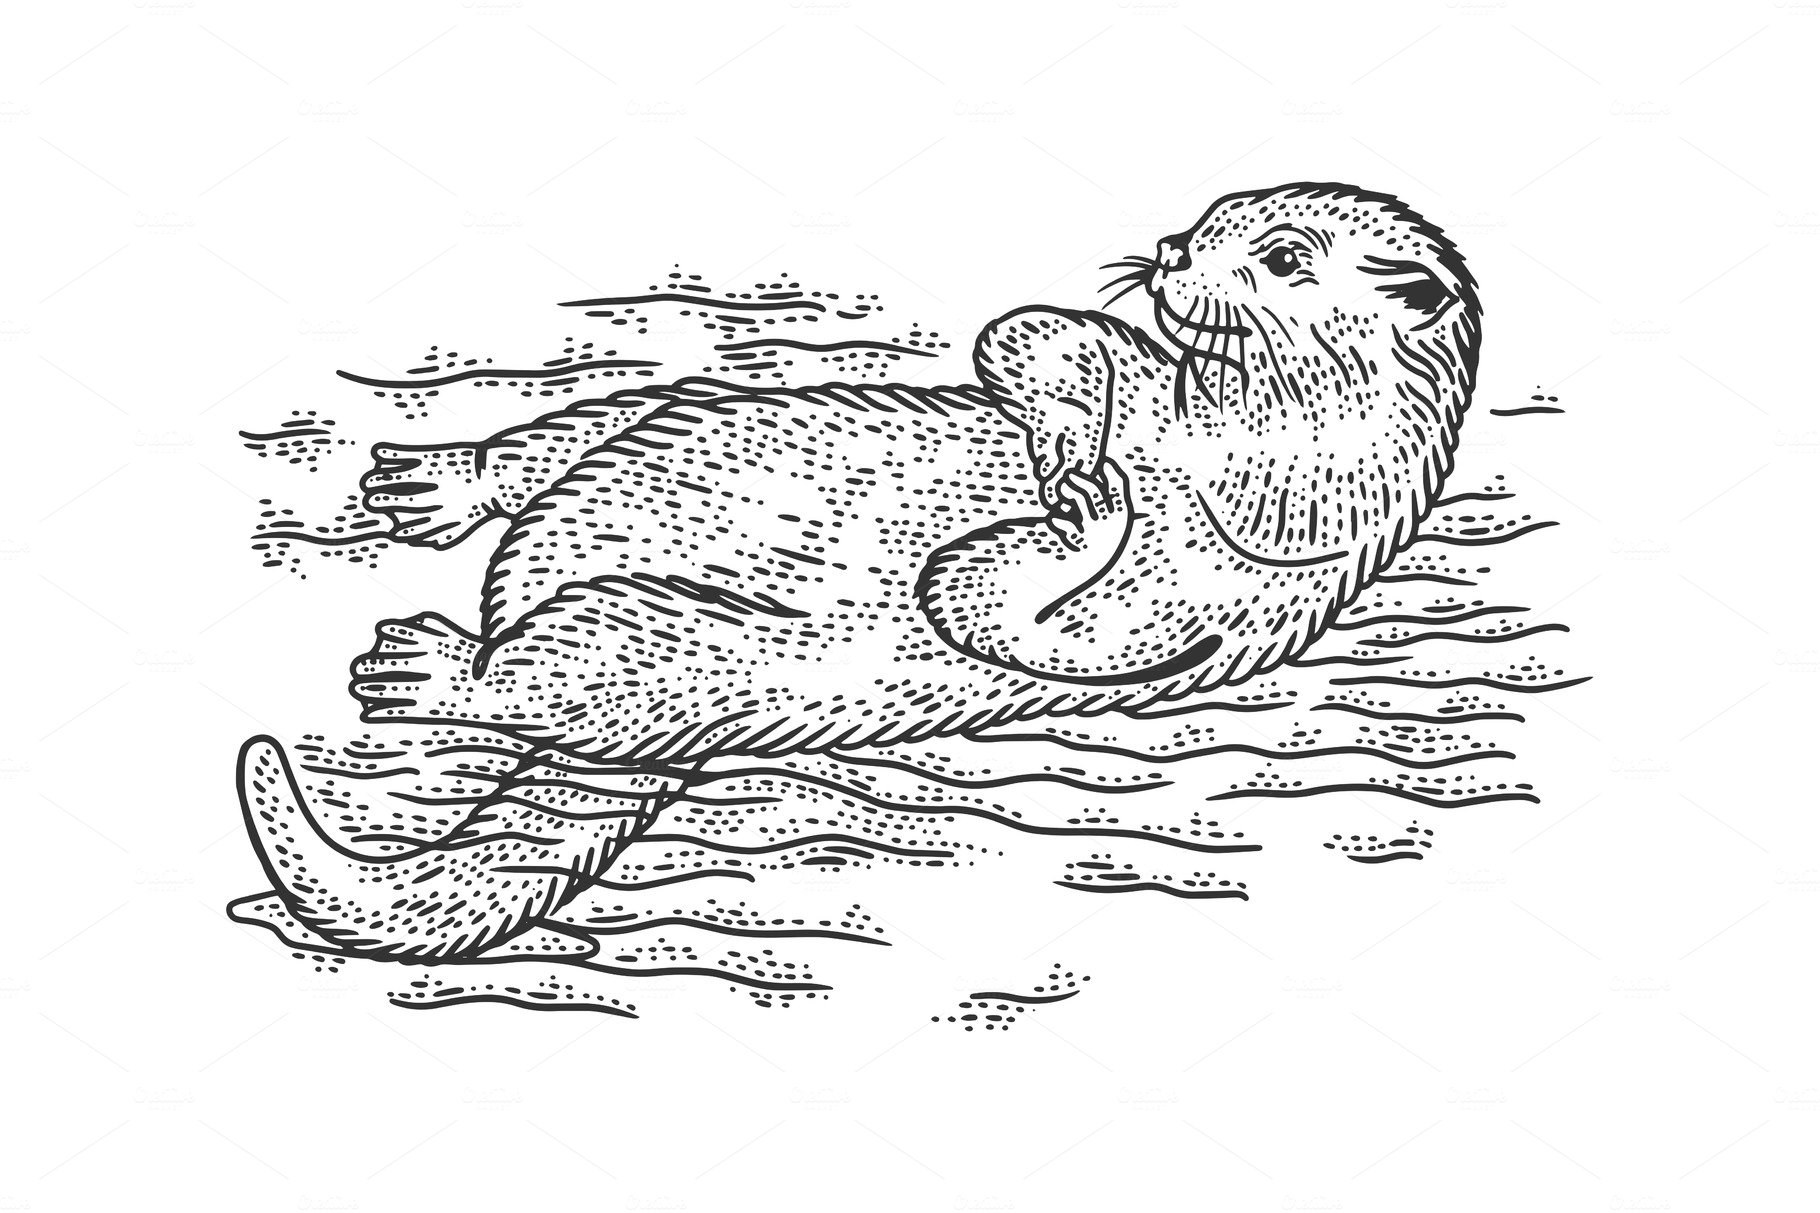 Otter is swimming on its back sketch cover image.